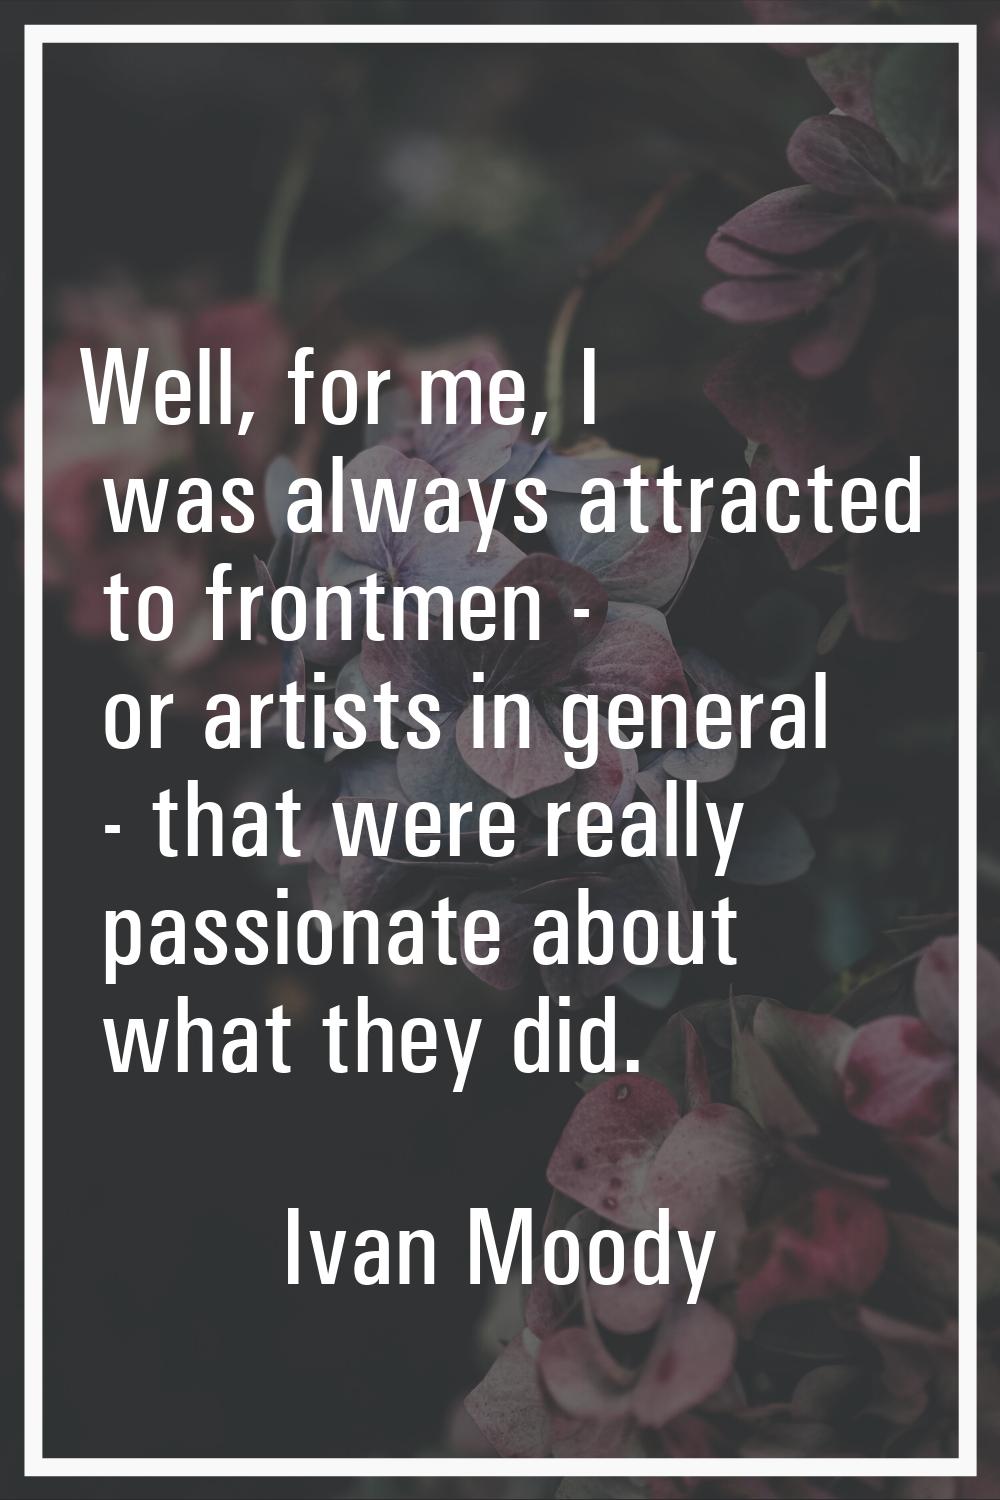 Well, for me, I was always attracted to frontmen - or artists in general - that were really passion